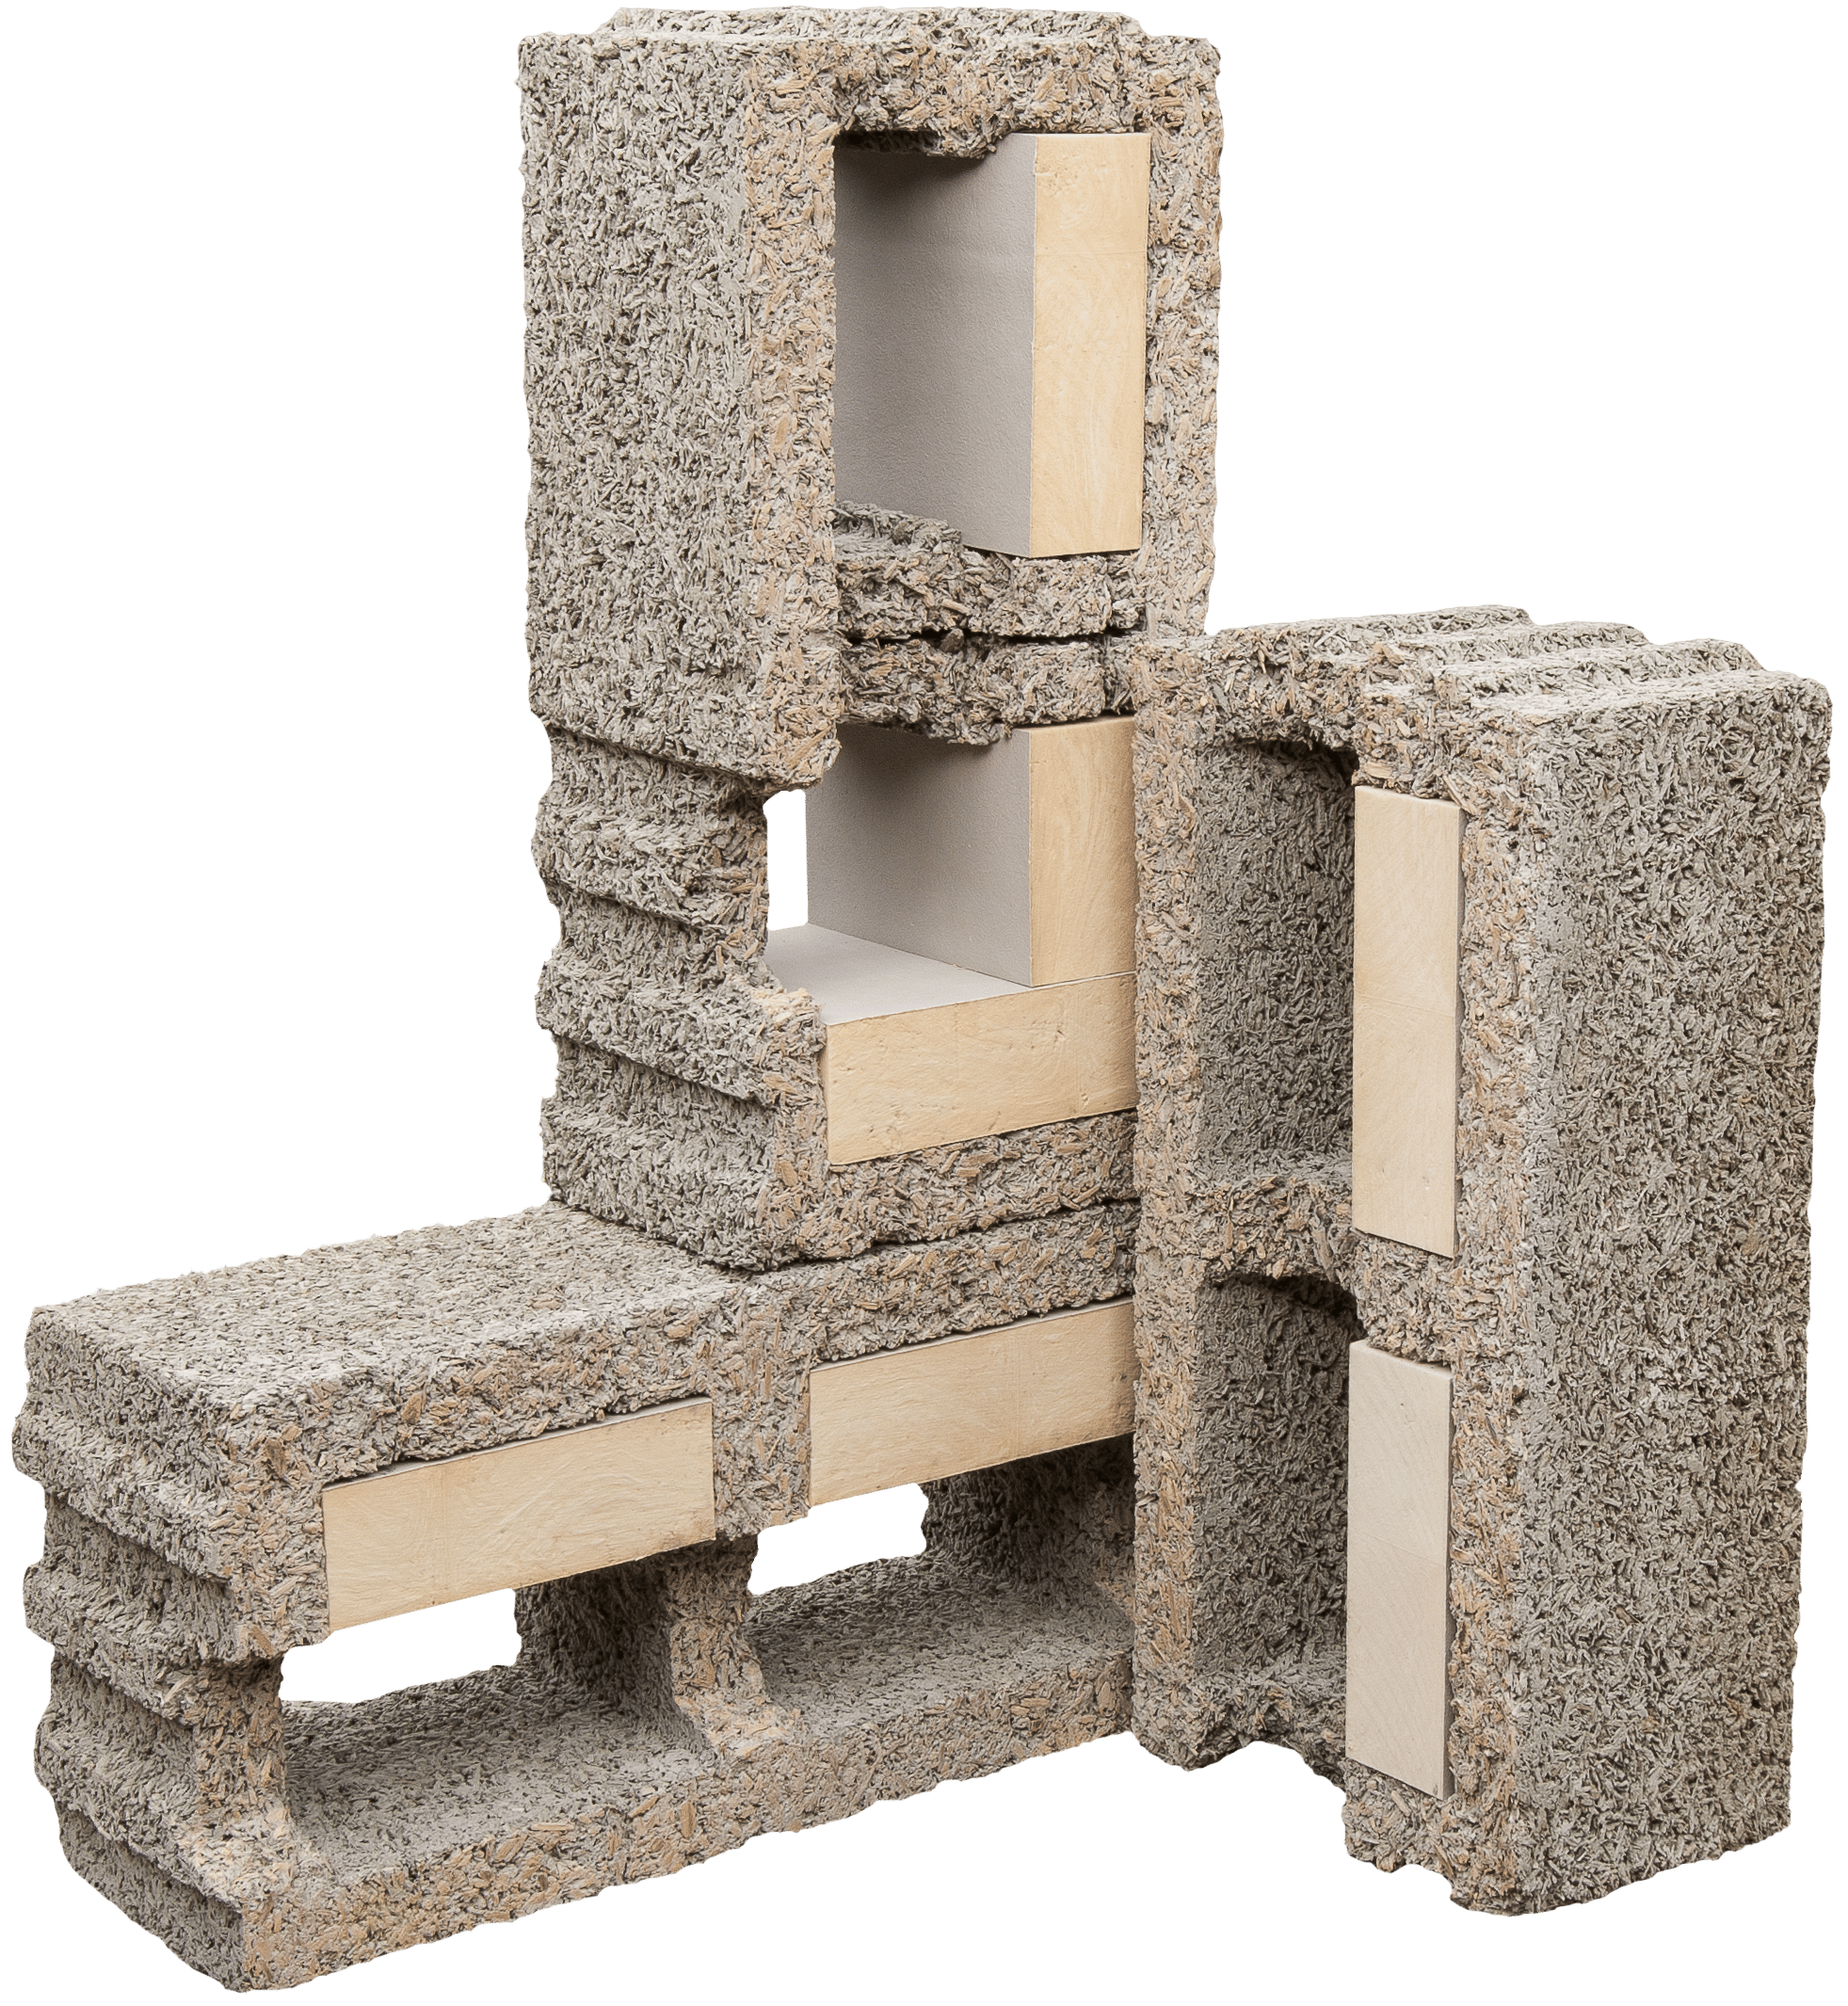 ICFs, or Insulated Concrete Forms, come in many different designs